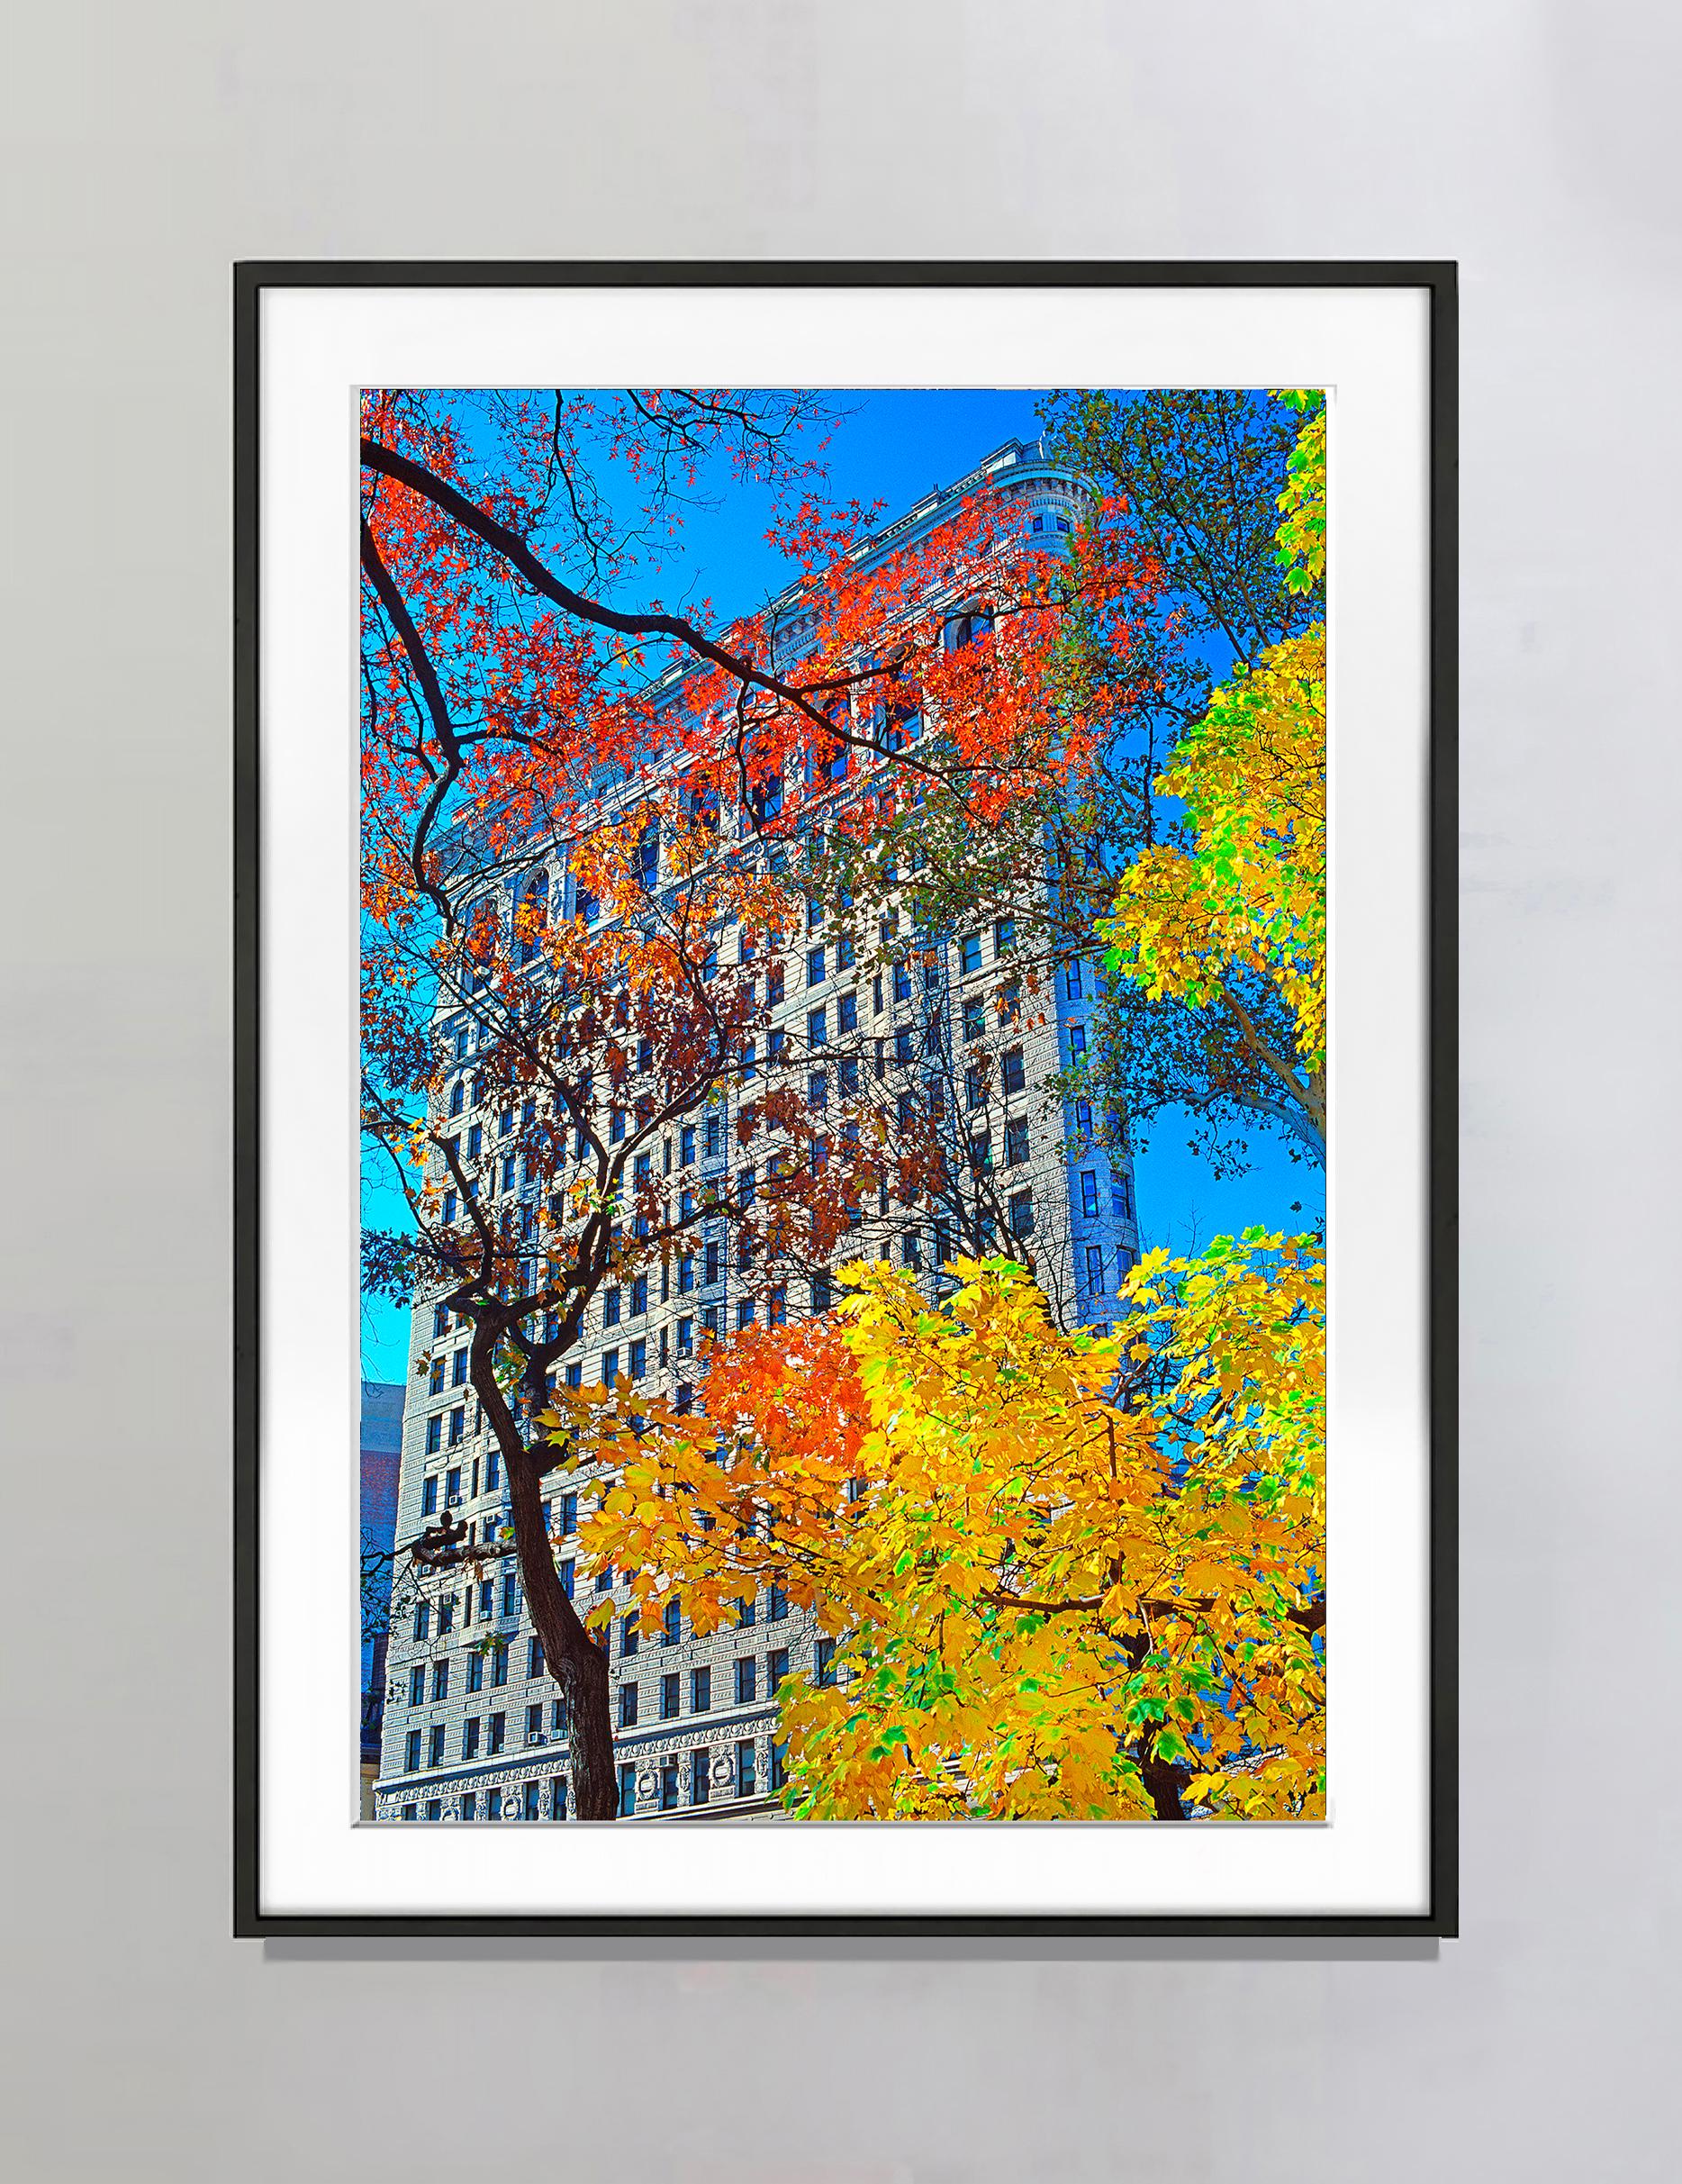 Romantic Flatiron Building in Autumn Colors of Orange and Yellow, Architecture - Photograph by Mitchell Funk